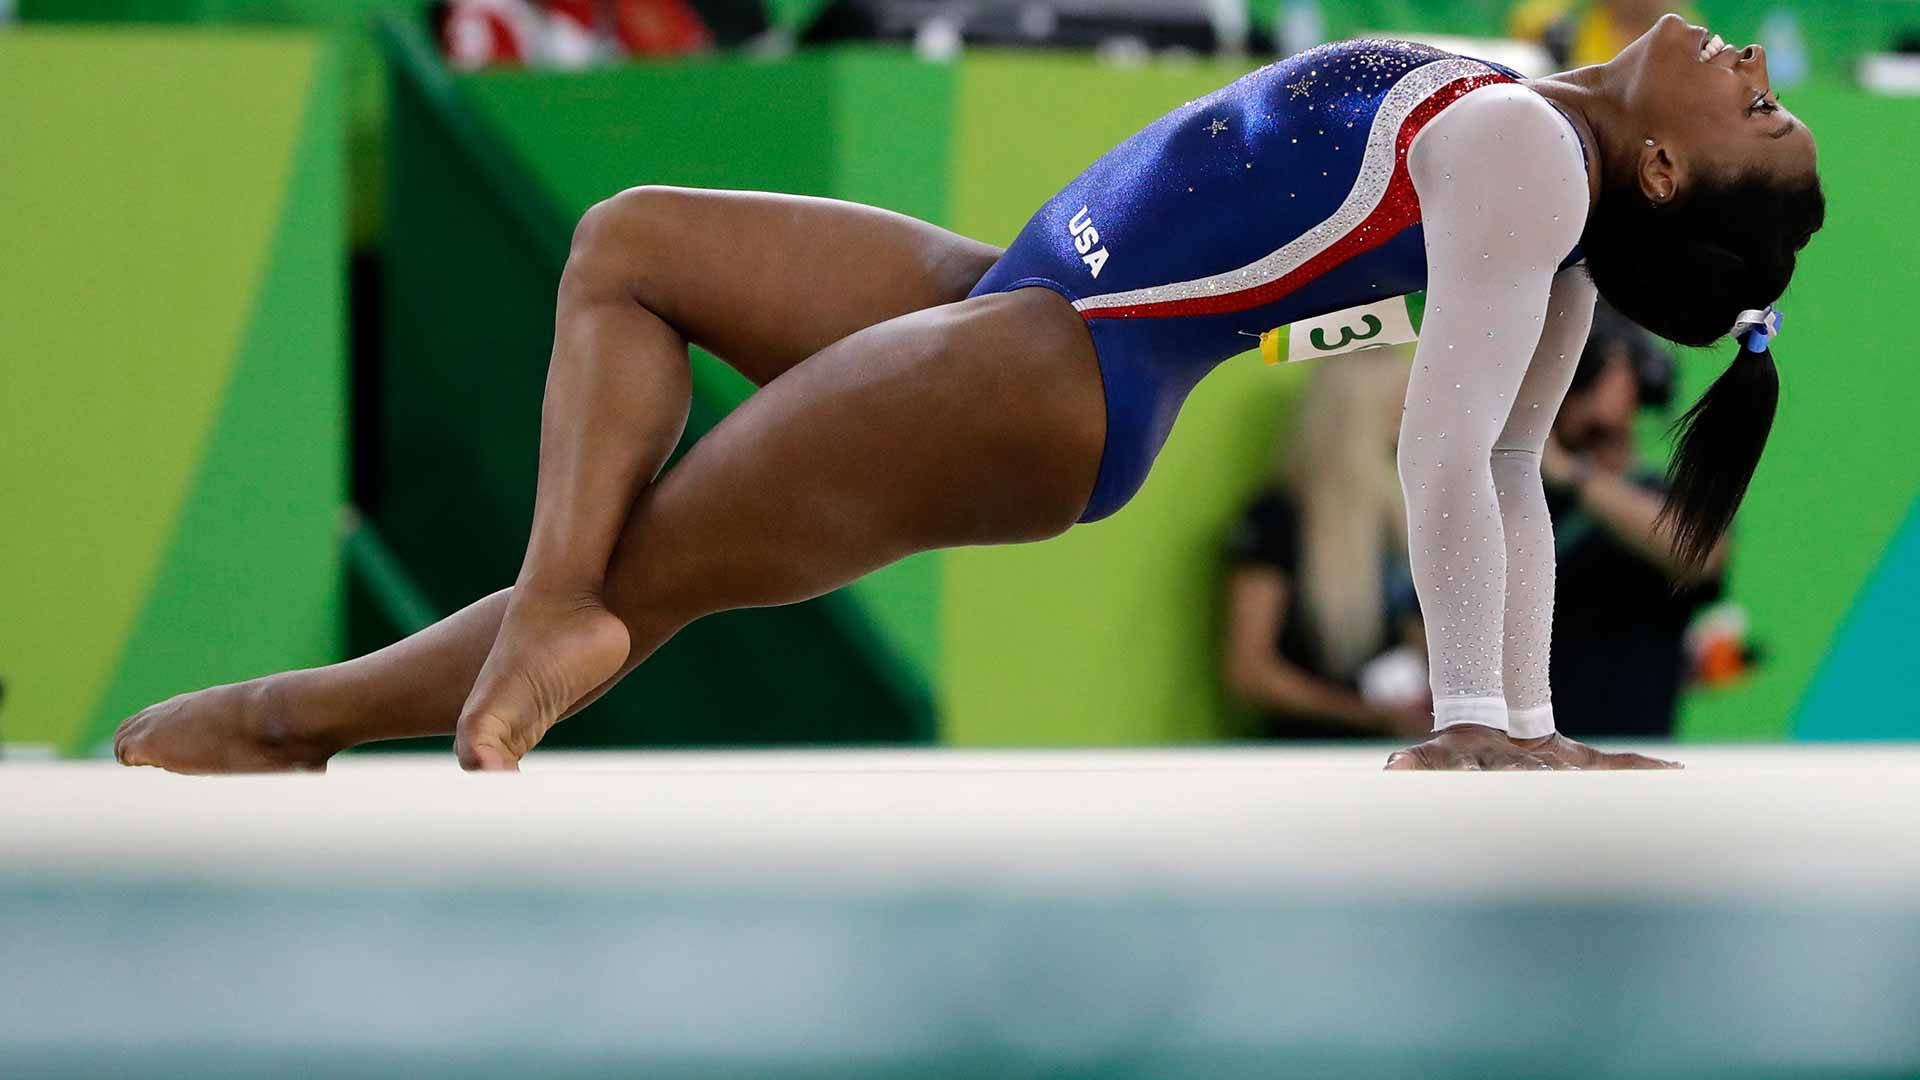 Olympic Gold Medalist Simone Biles At The 2017 World Championships.